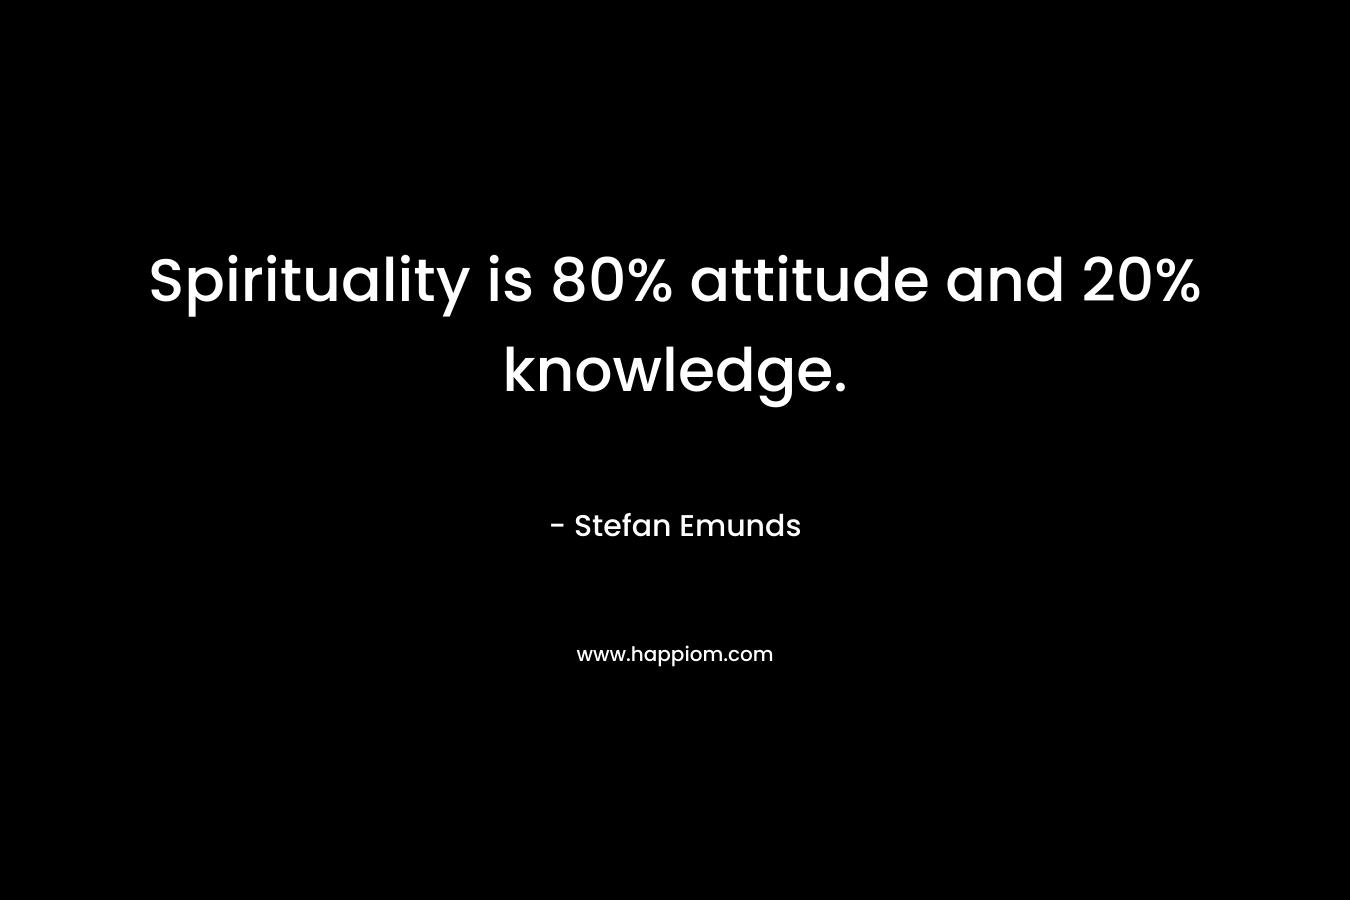 Spirituality is 80% attitude and 20% knowledge.